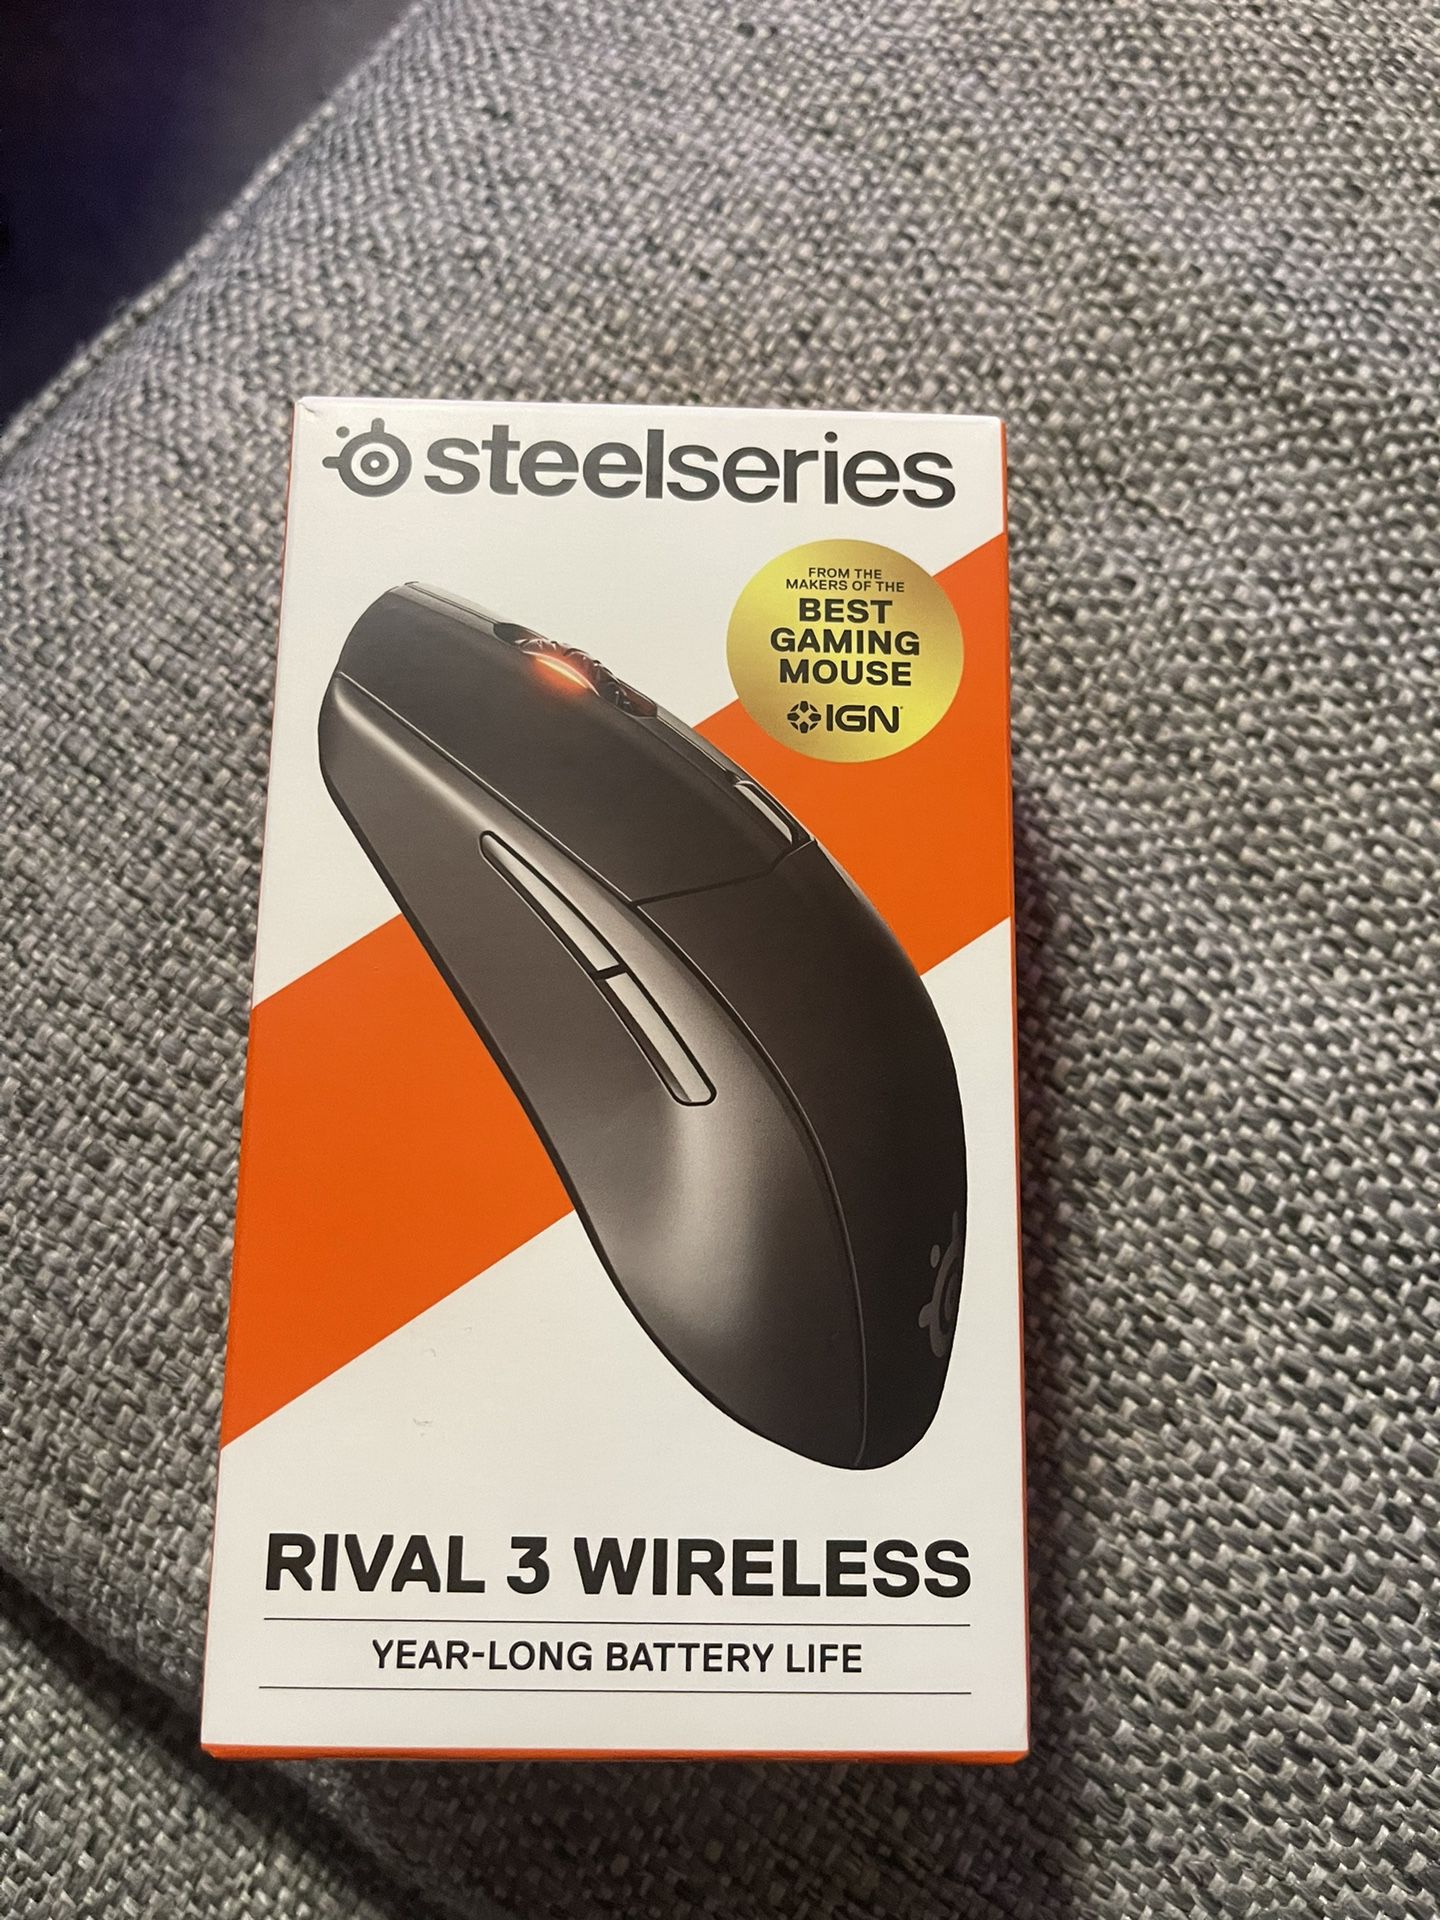 SteelSeries Rival 3 62521 Wireless Gaming Optical Mouse, Matte 